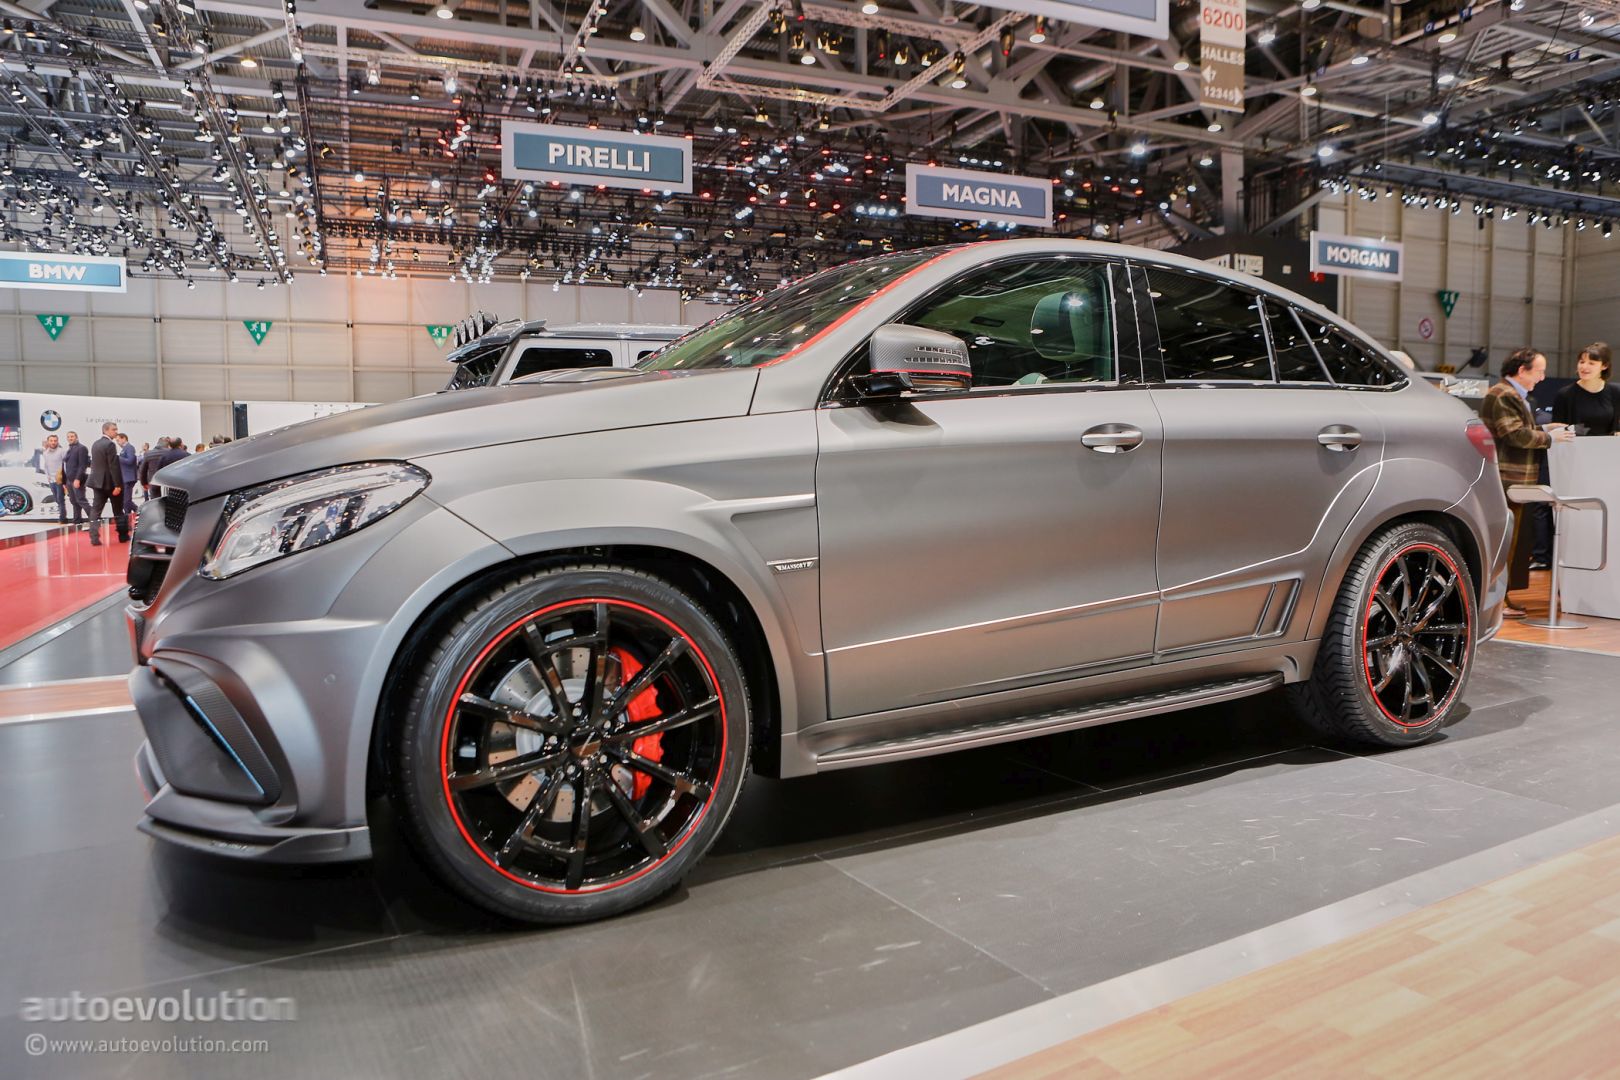 Mansory Showcases Its Tuned Mercedes Cars and SUV in Geneva